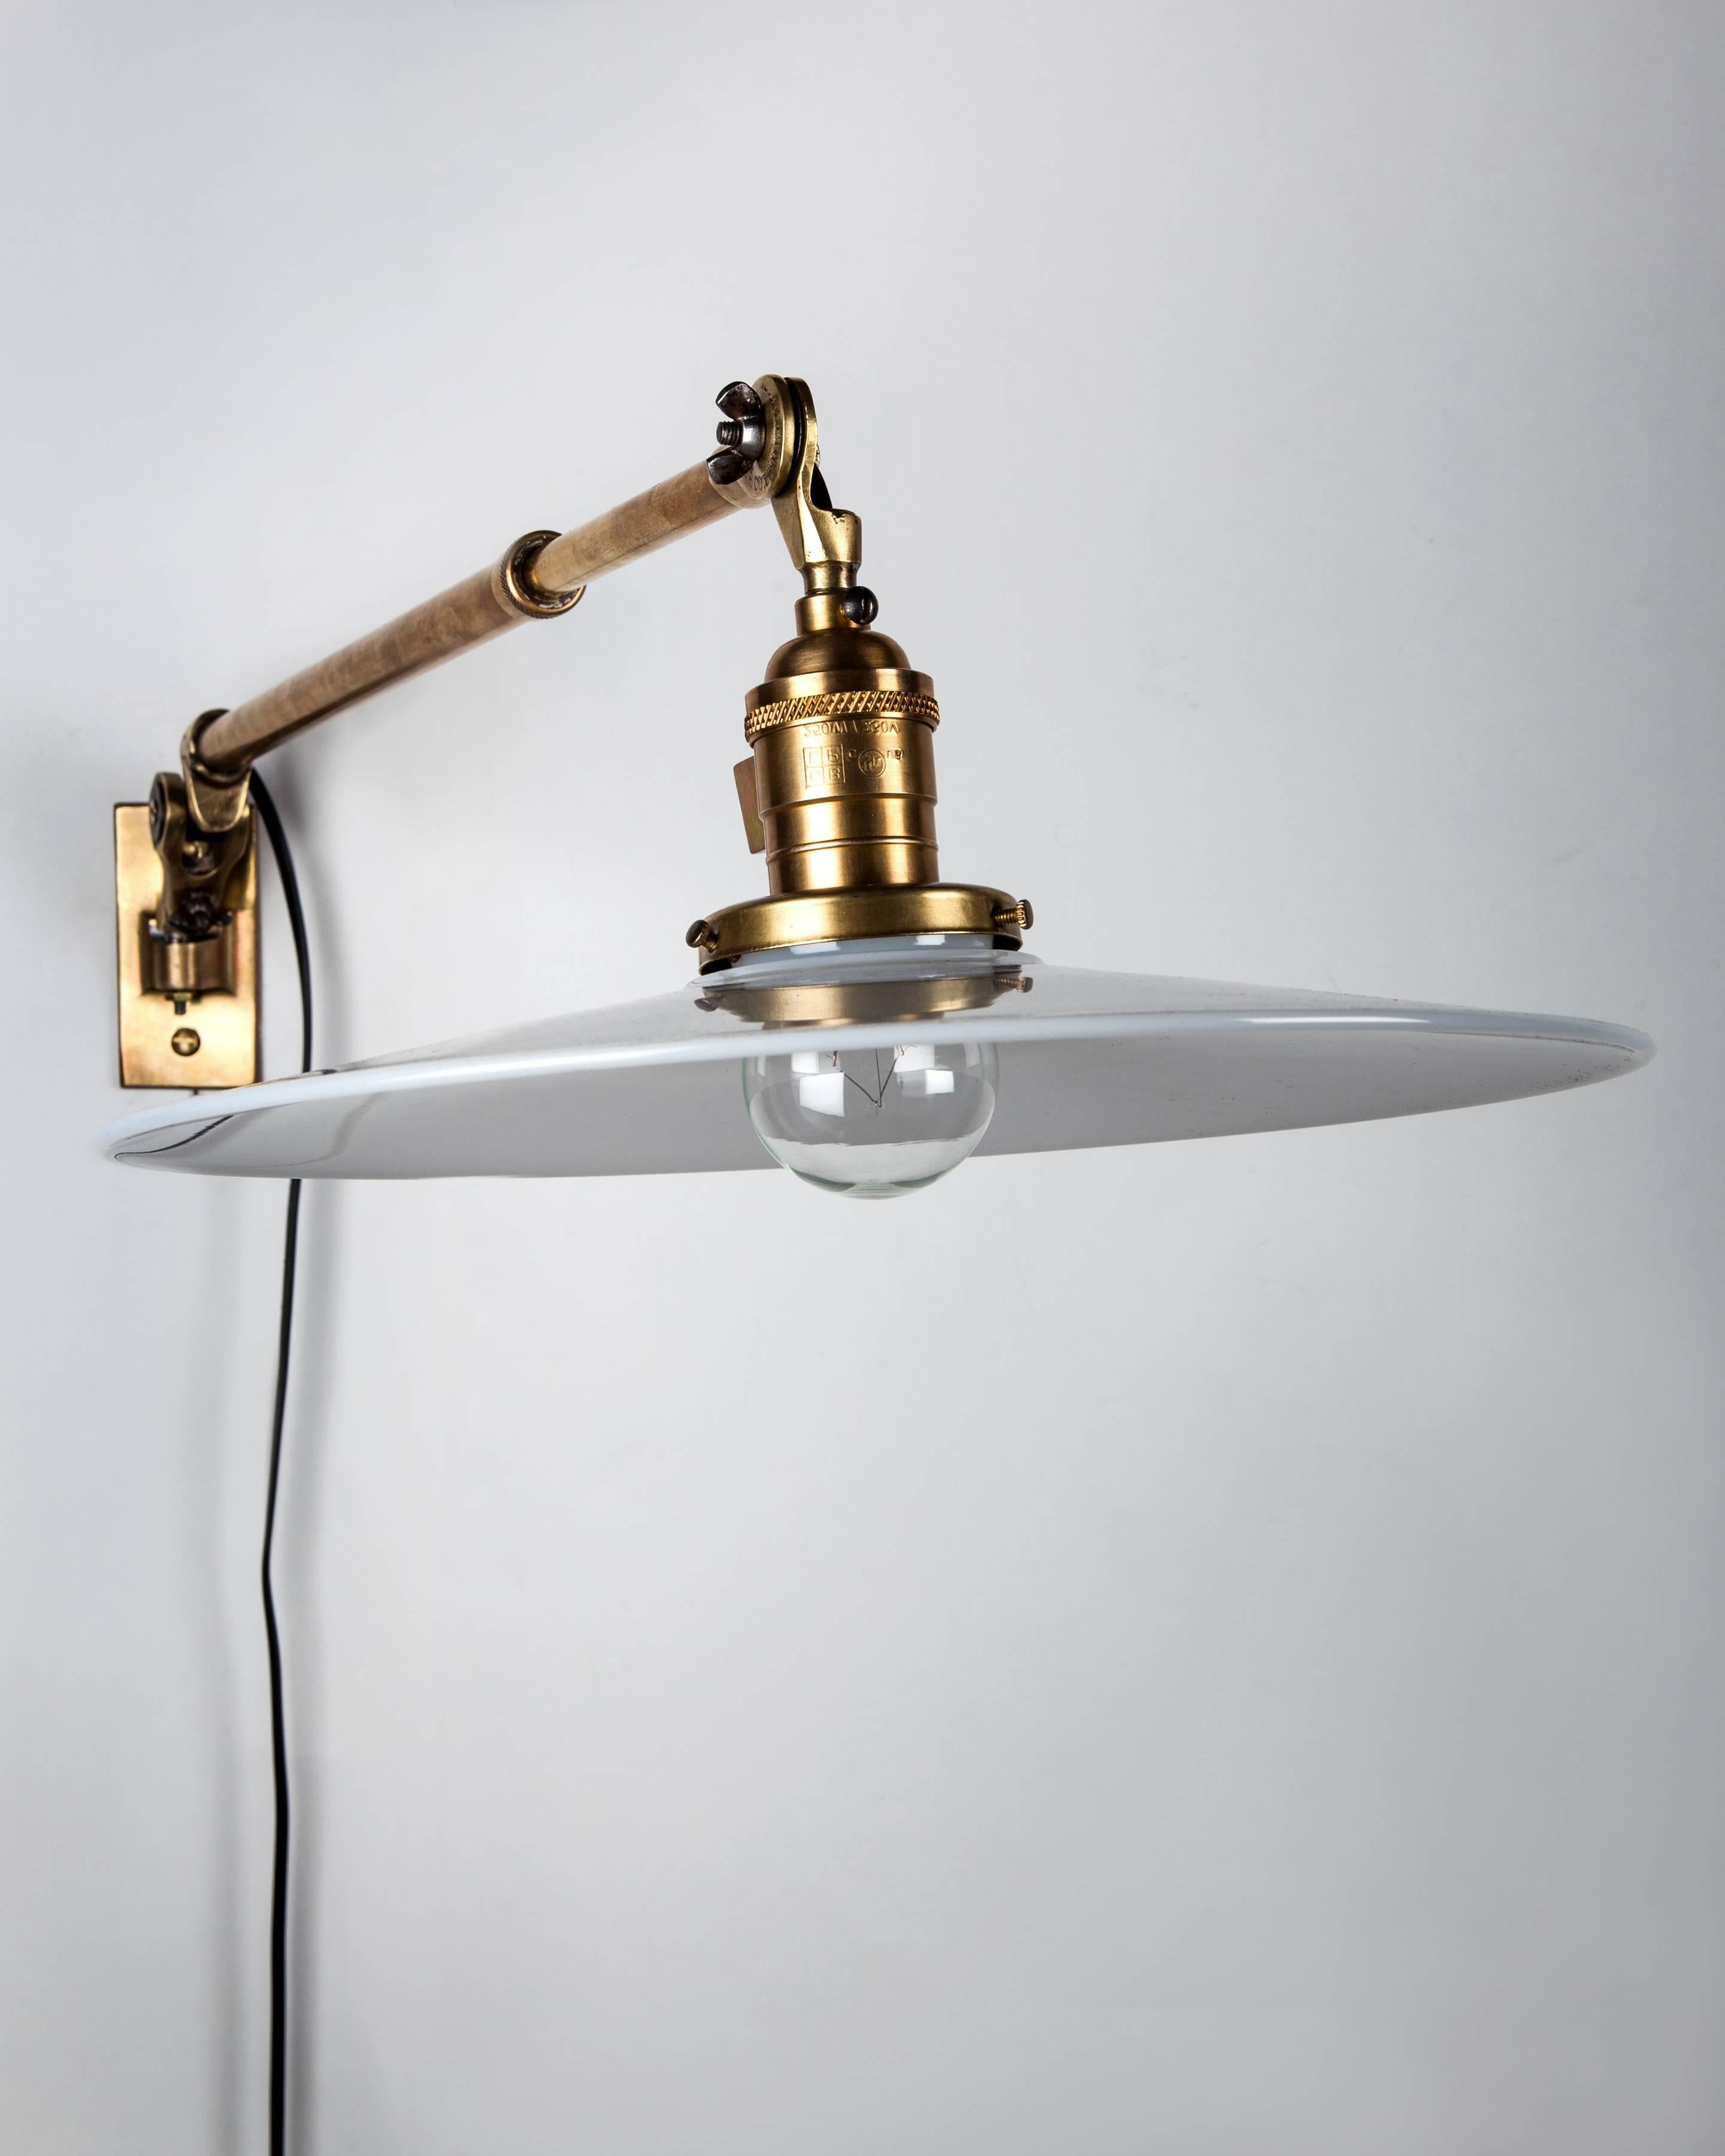 AIS3048
A near pair of telescoping swing arm sconces with a unique vertical pivot as well as right to left rotation, in their original aged brass finish. Having contemporary flat opal glass shades. Signed by the Worcester, Massachusetts maker O. C.